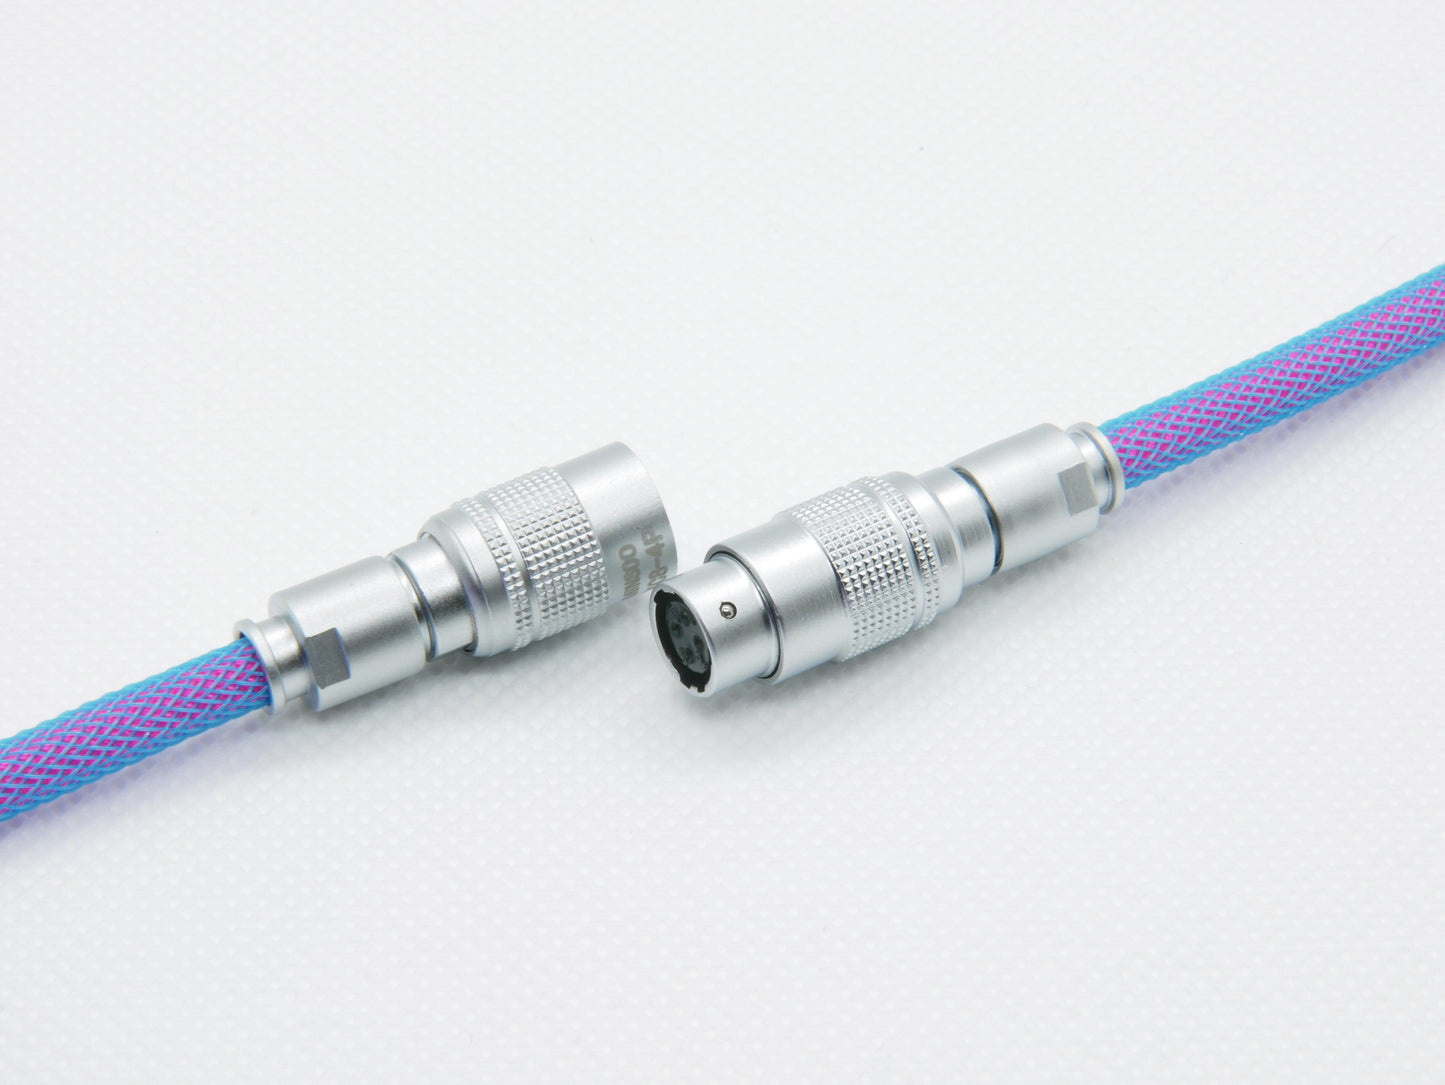 Laser Themed Cable